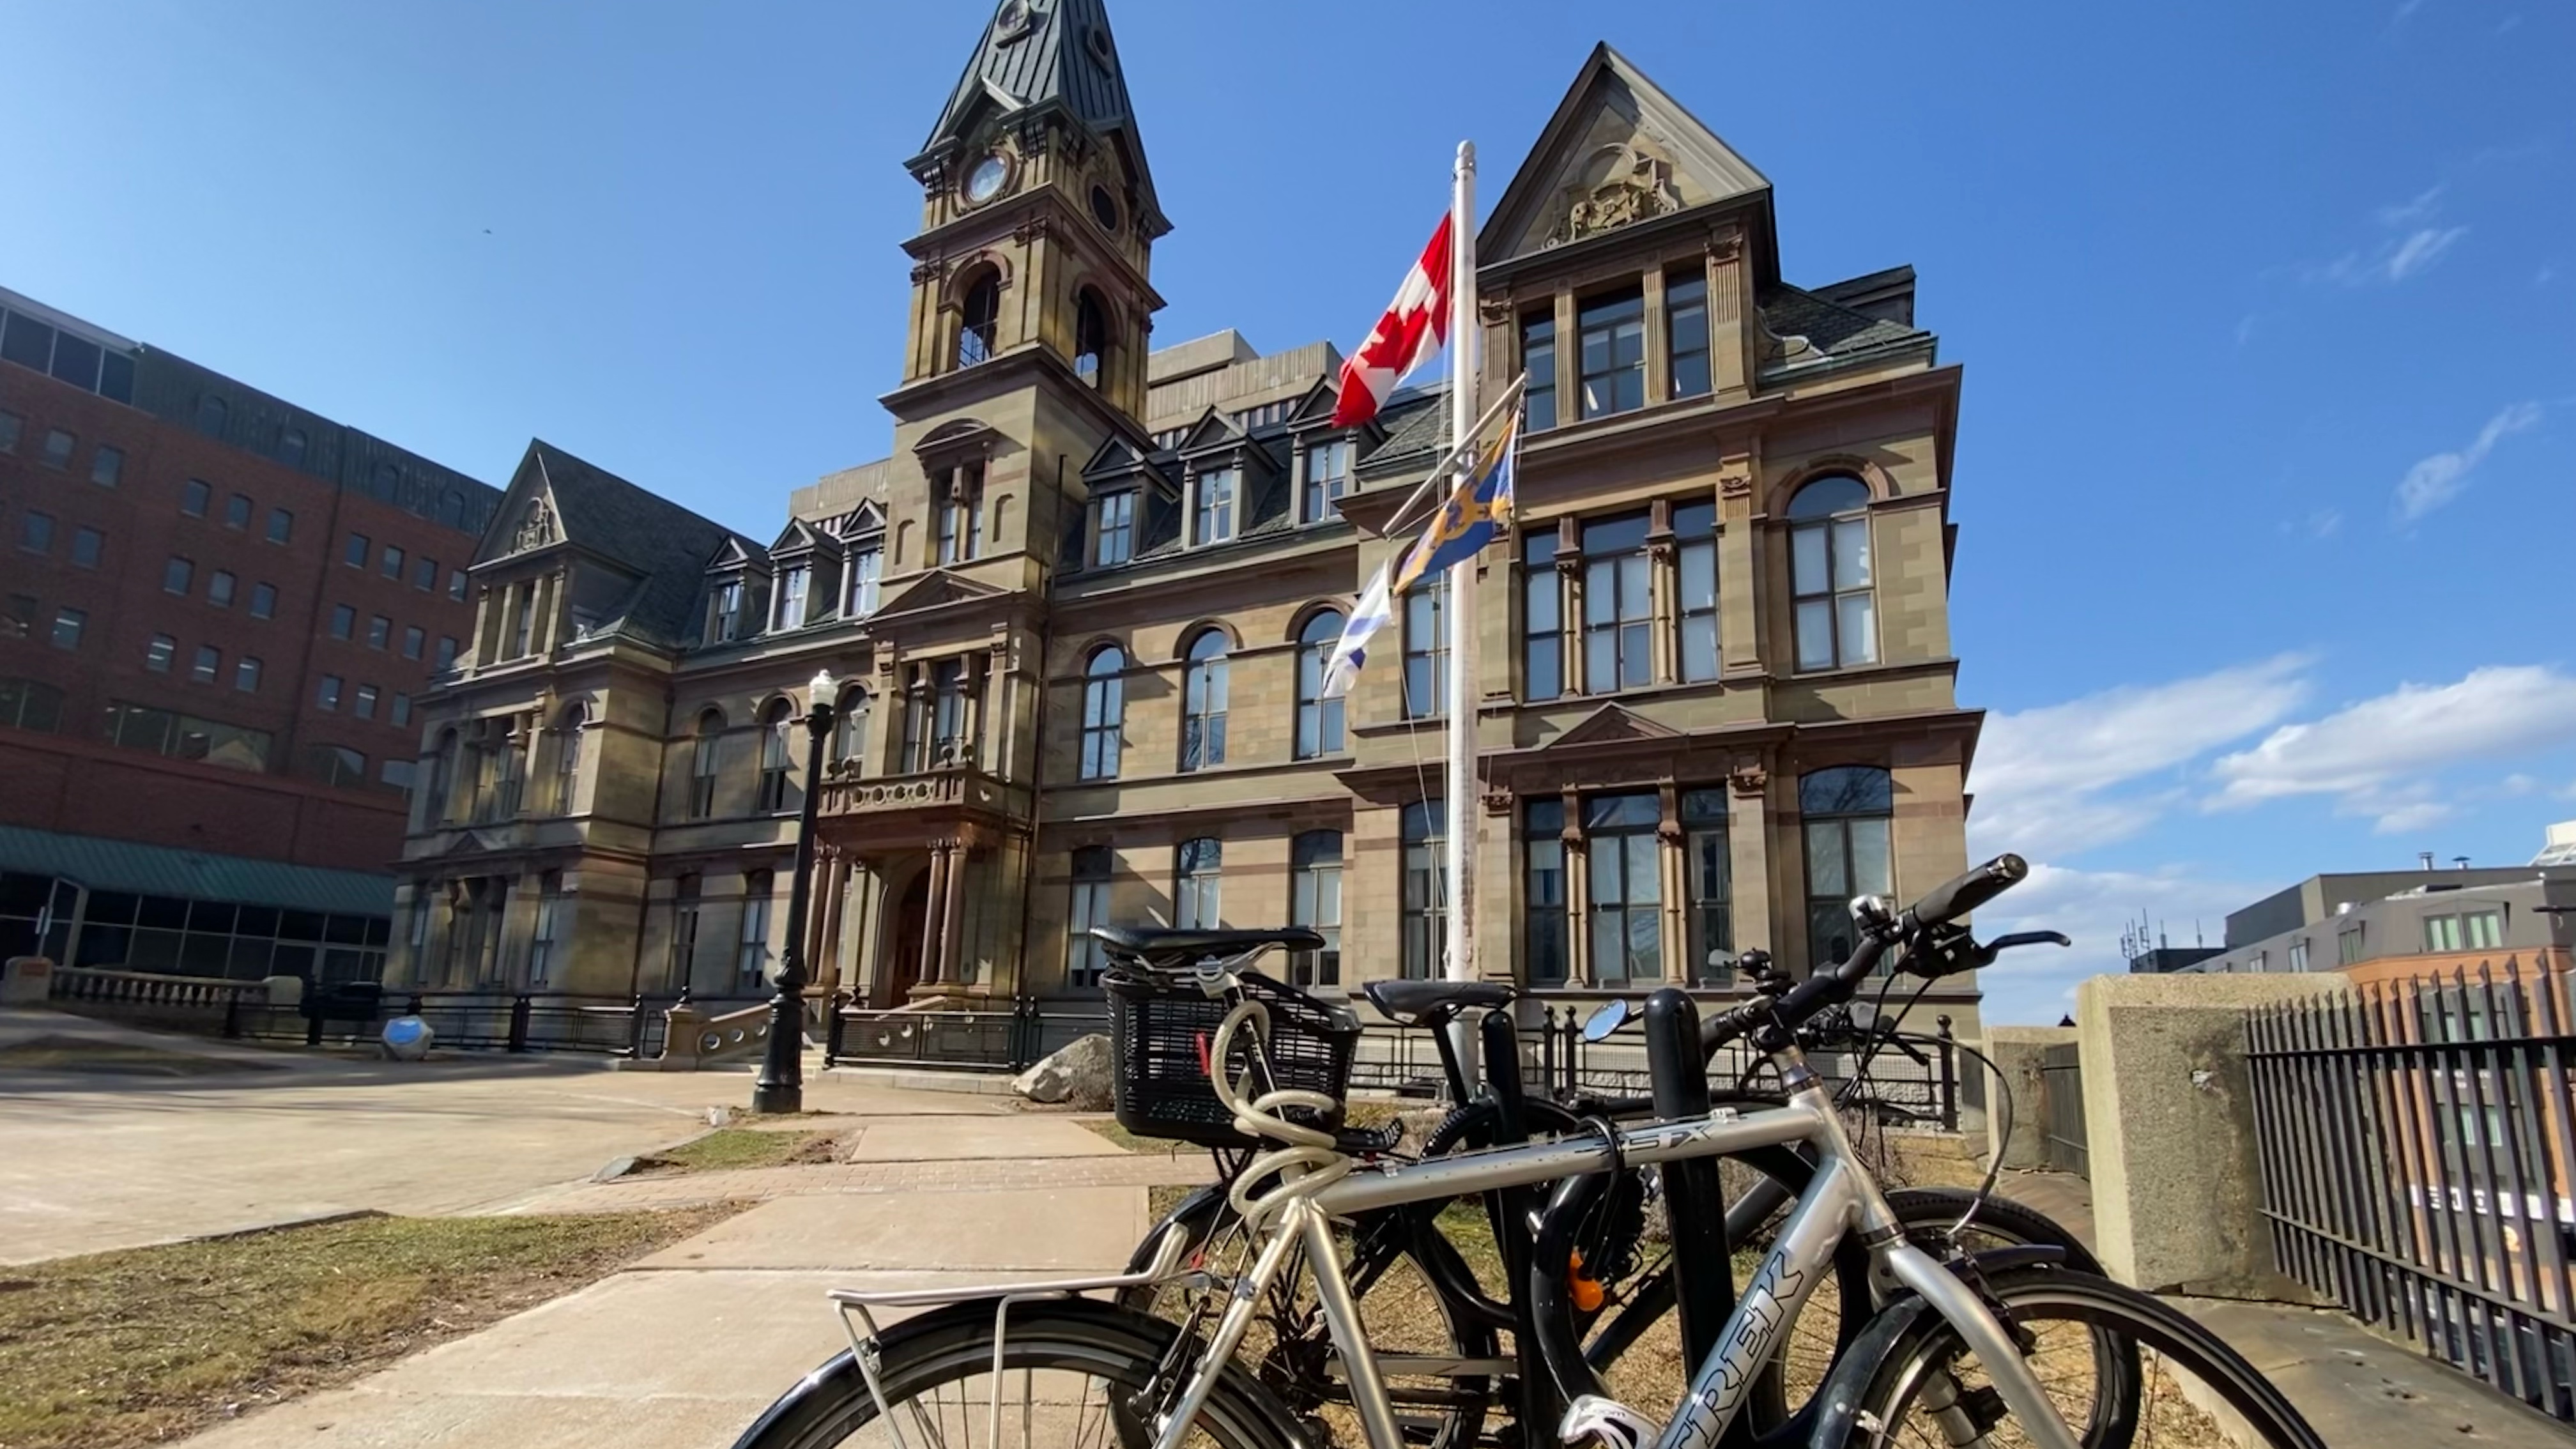 In the background there's an older stone building with a clock tower in the centre of it. In the middle ground there are flags on a flag pole. In the foreground there's a bike locked to a back rack. The sky is blue with just a few clouds.